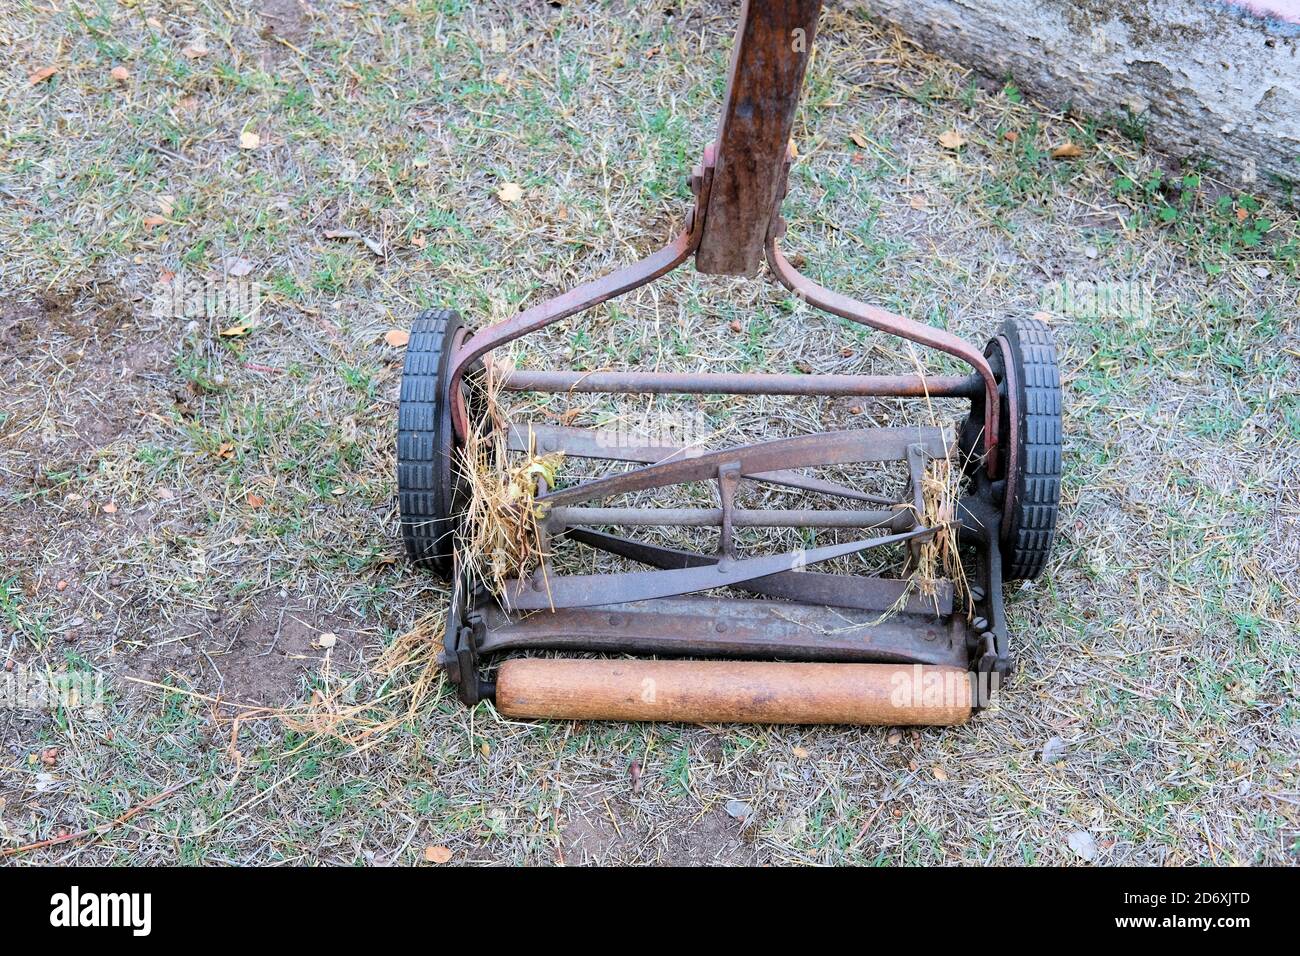 Reel mower hi-res stock photography and images - Alamy